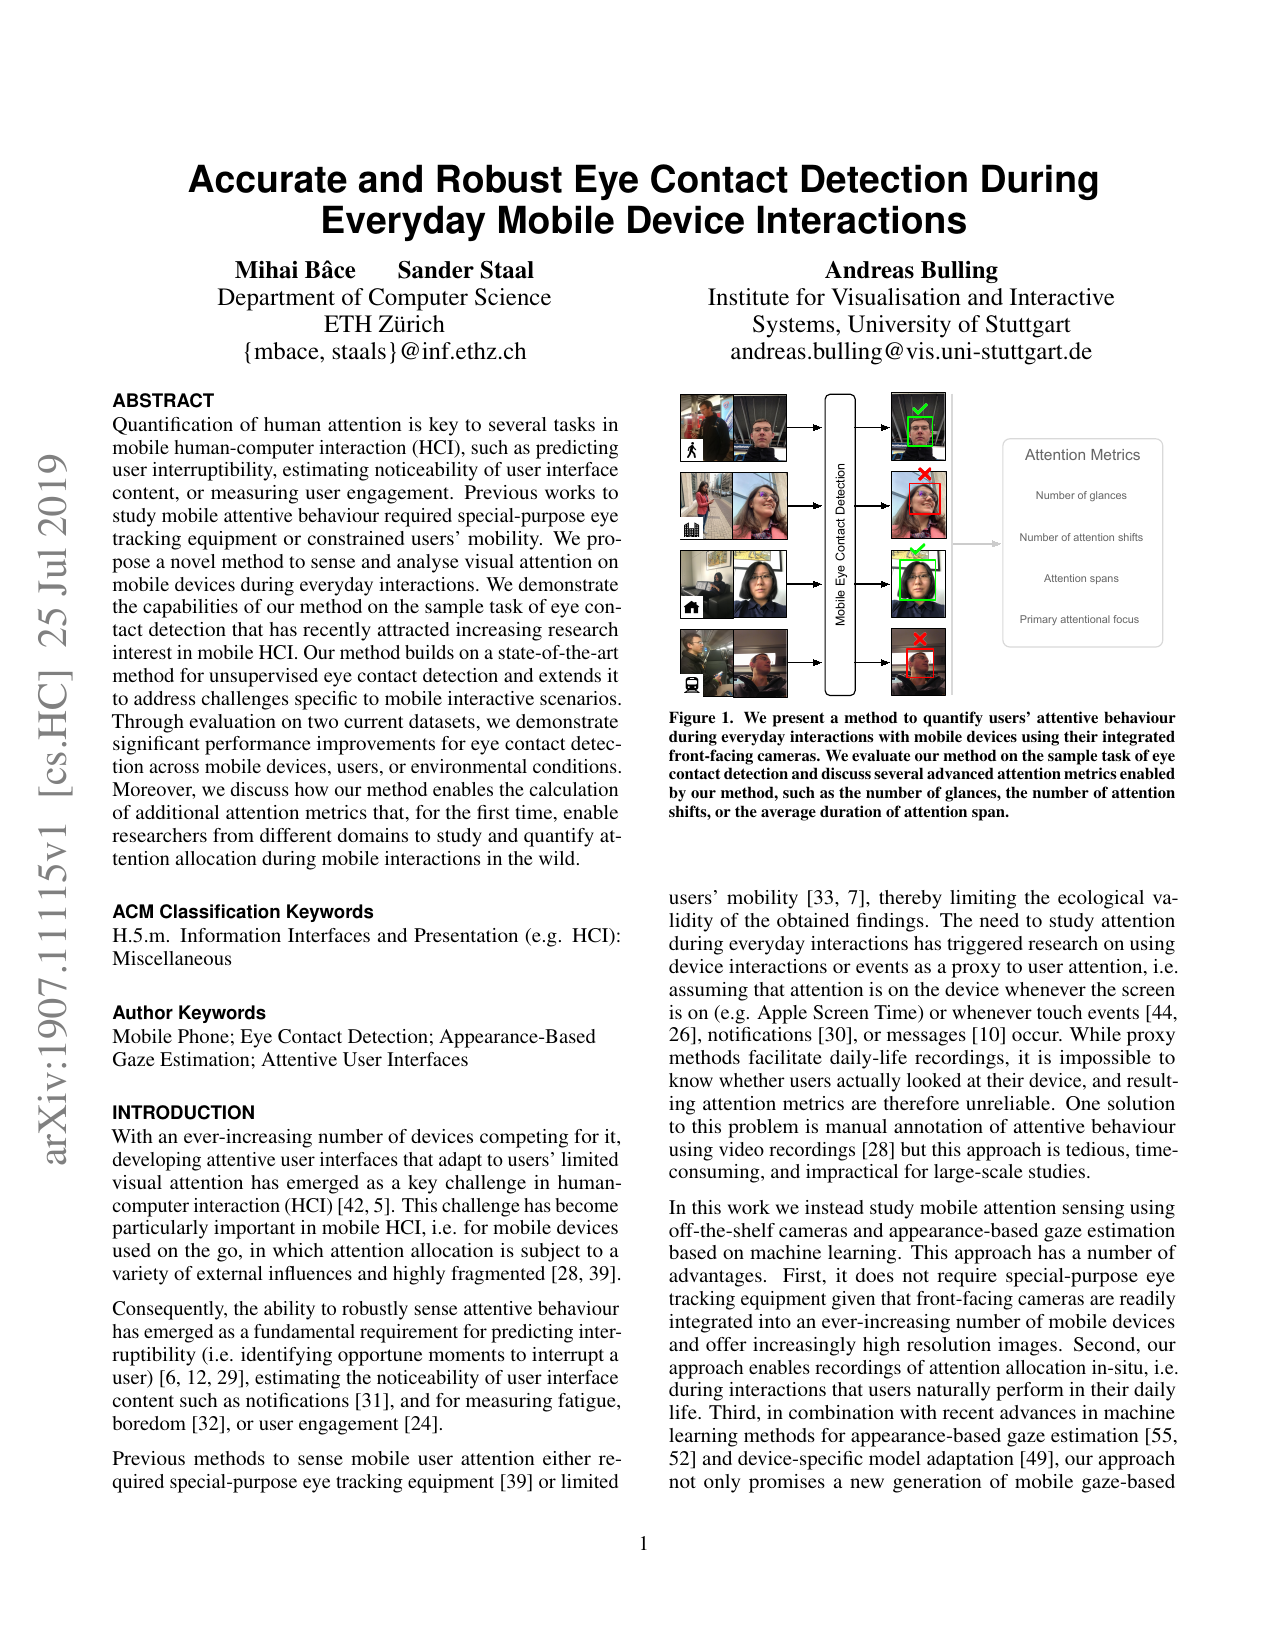 Accurate and Robust Eye Contact Detection During Everyday Mobile Device Interactions